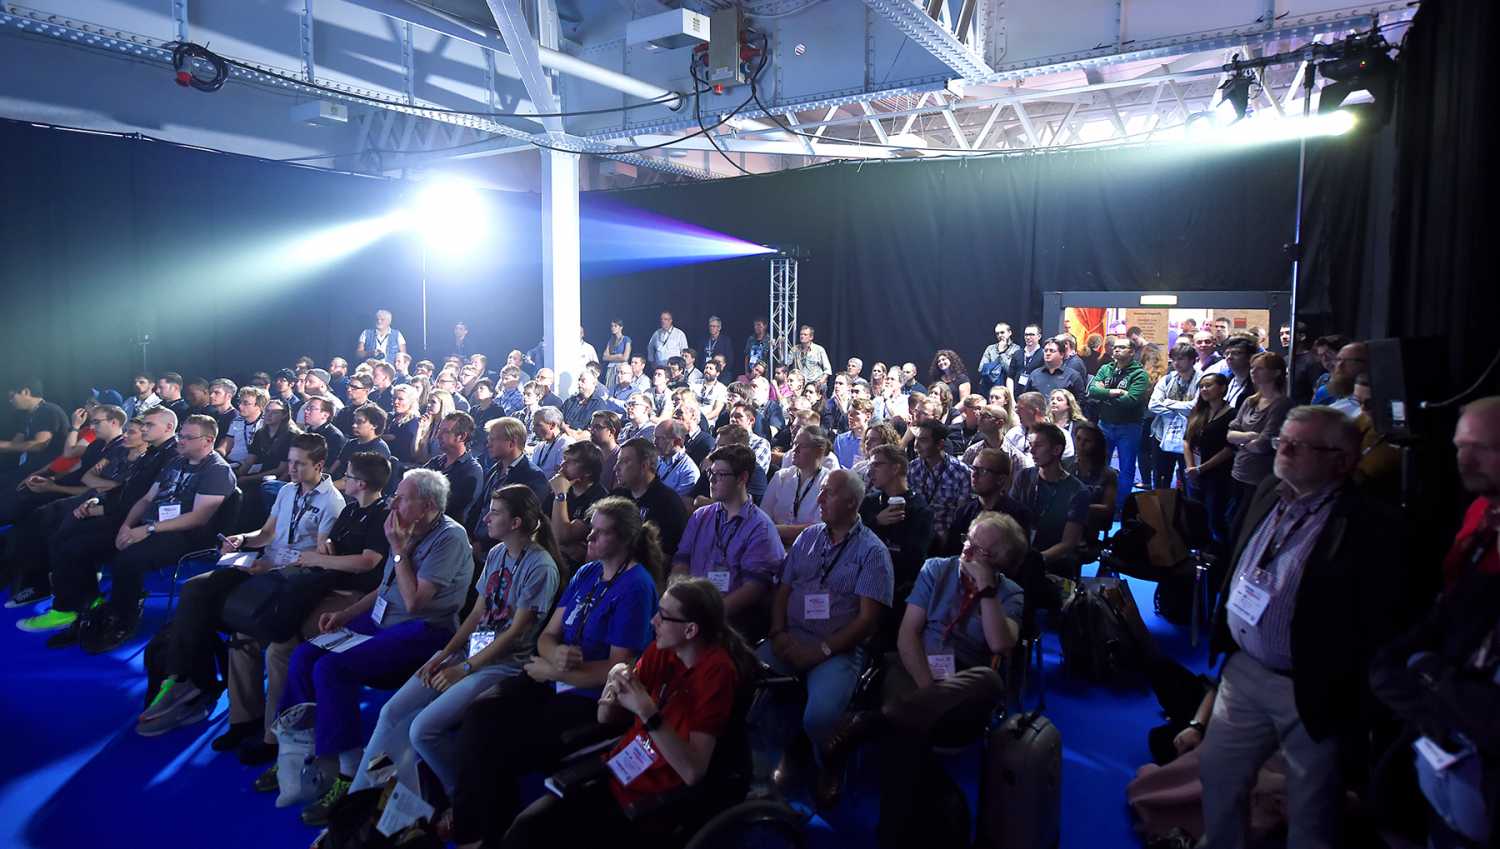 the PLASA Show seminar programme goes from strength to strength